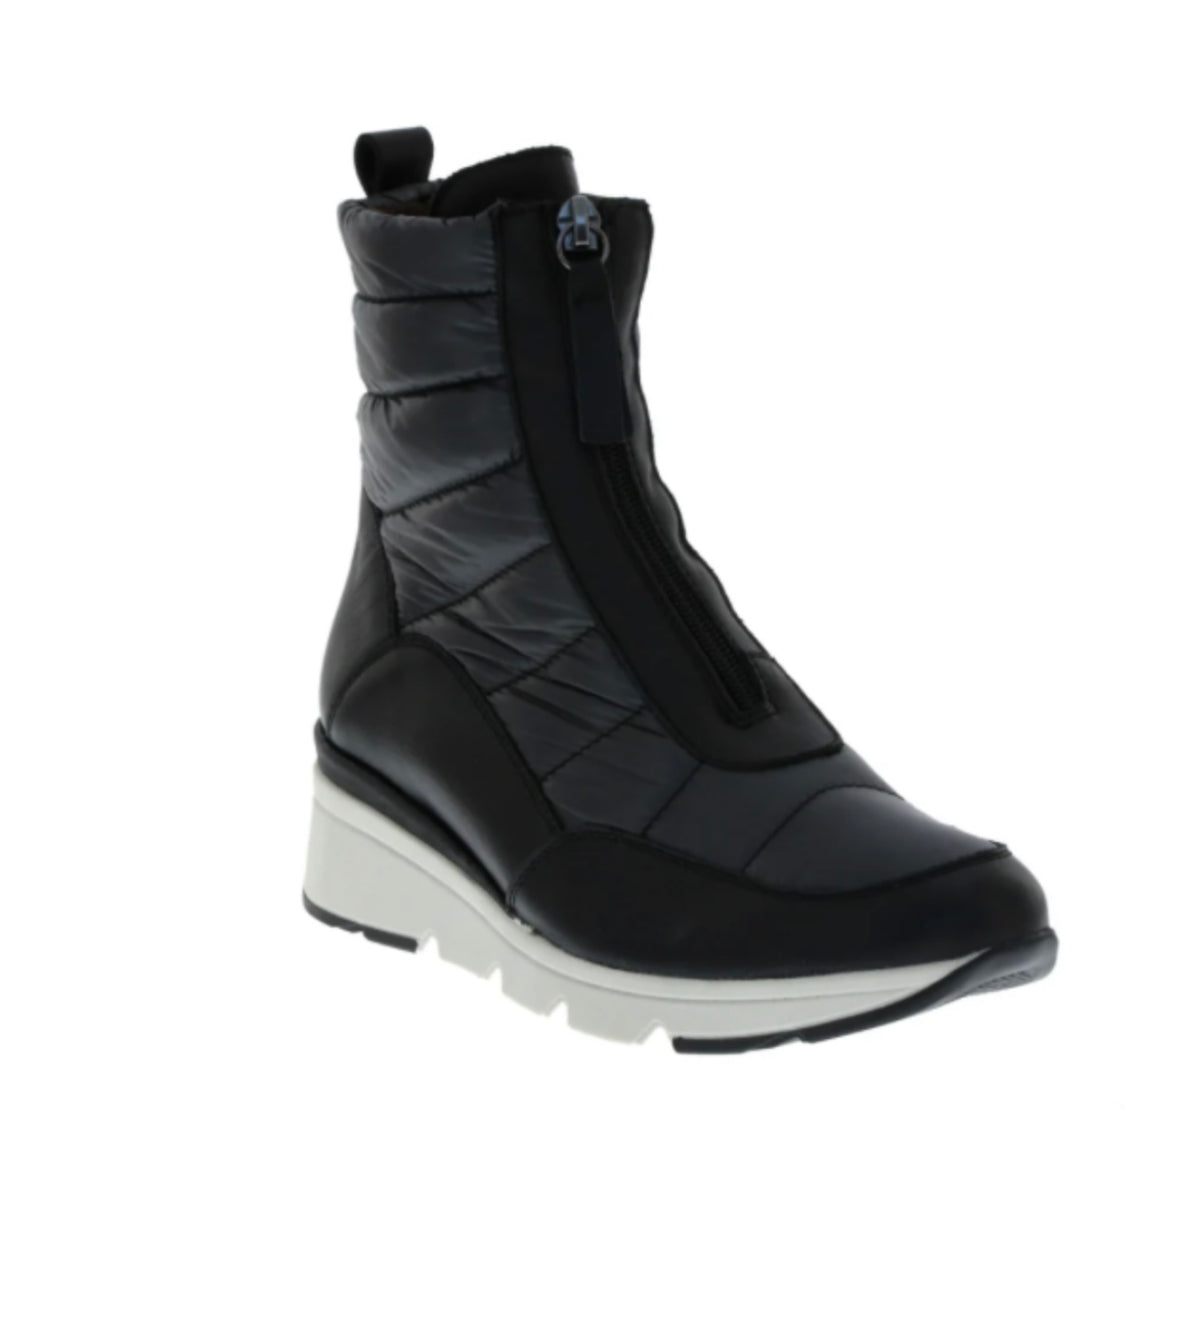 Neo Black and Platinum Wedge Padded Ankle Boot 20948NE